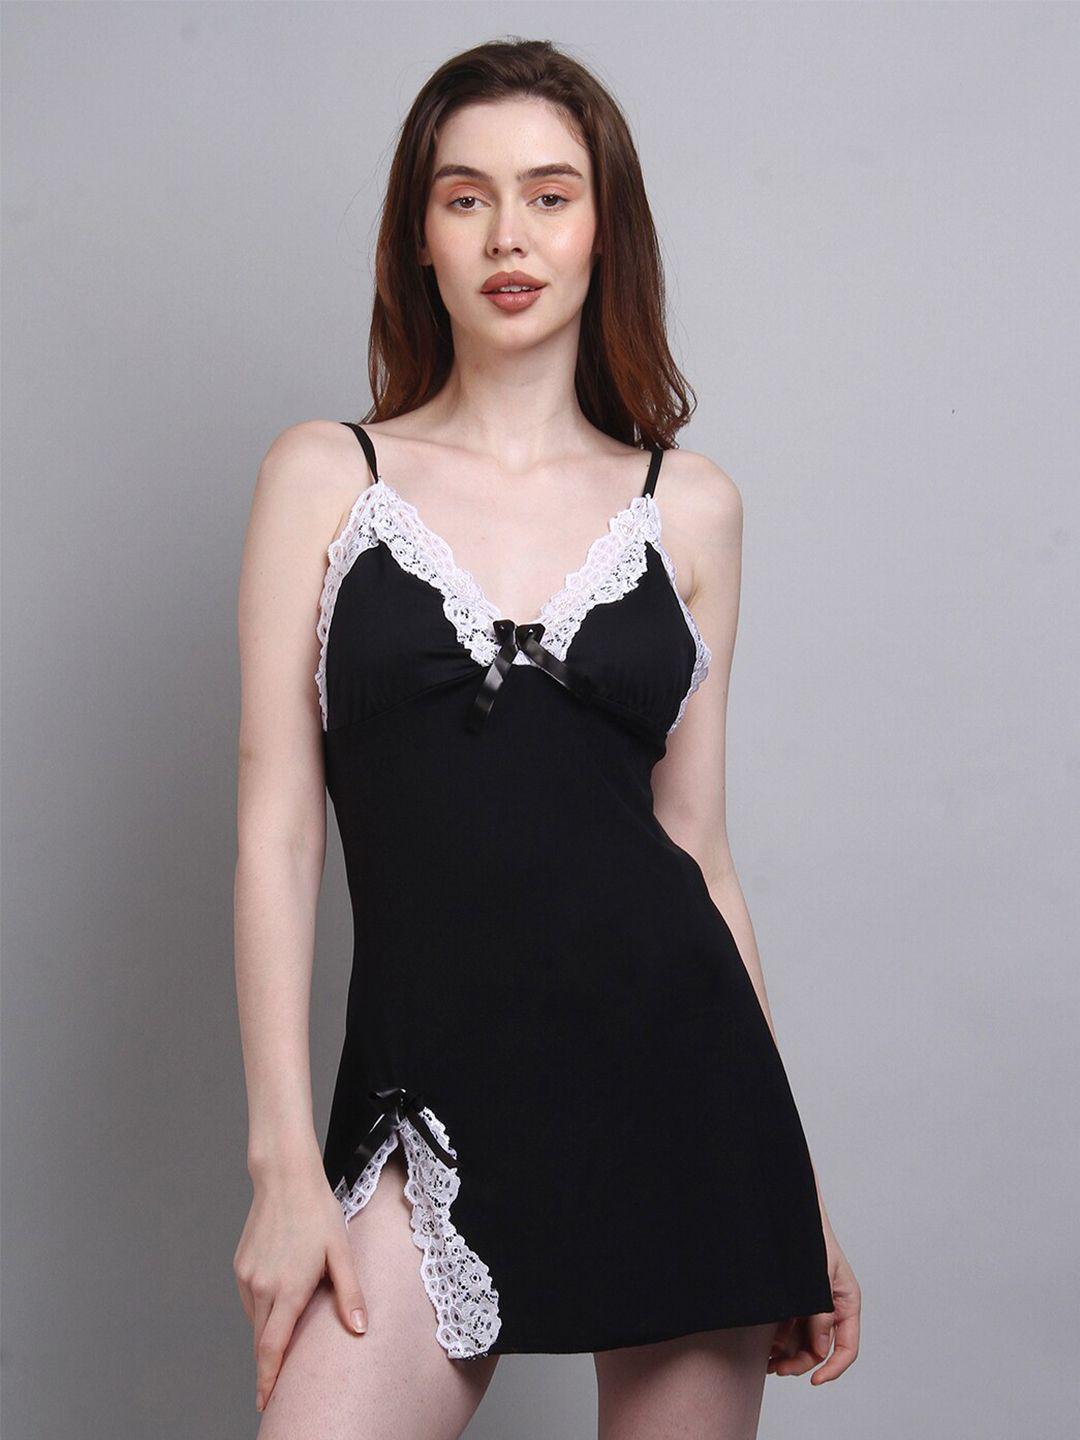 herryqeal shoulder straps soft stretchable & comfortable baby doll